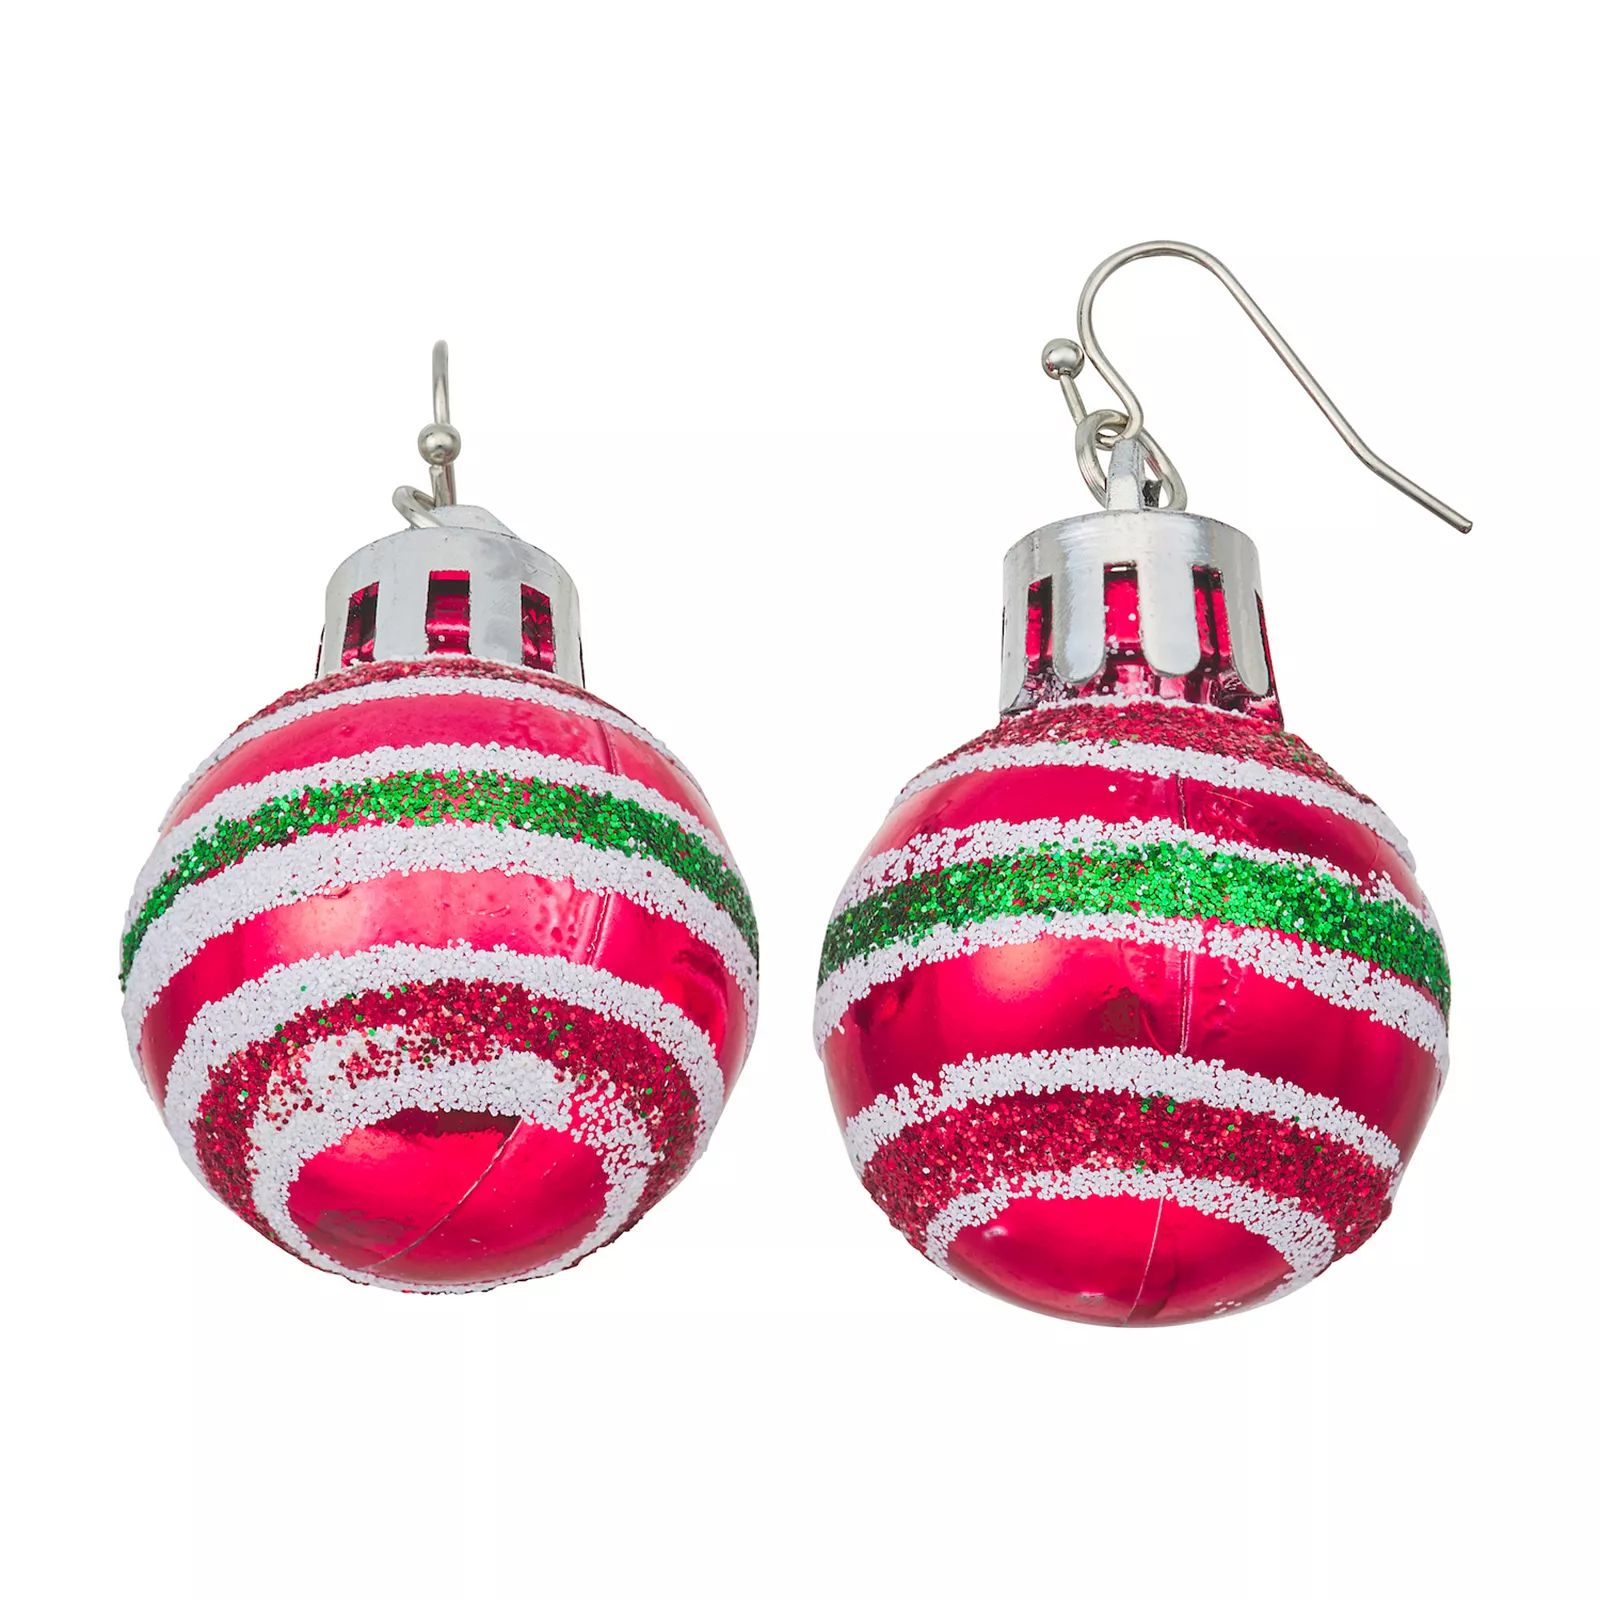 Celebrate Together™ Large Christmas Ornament Earrings | Kohl's